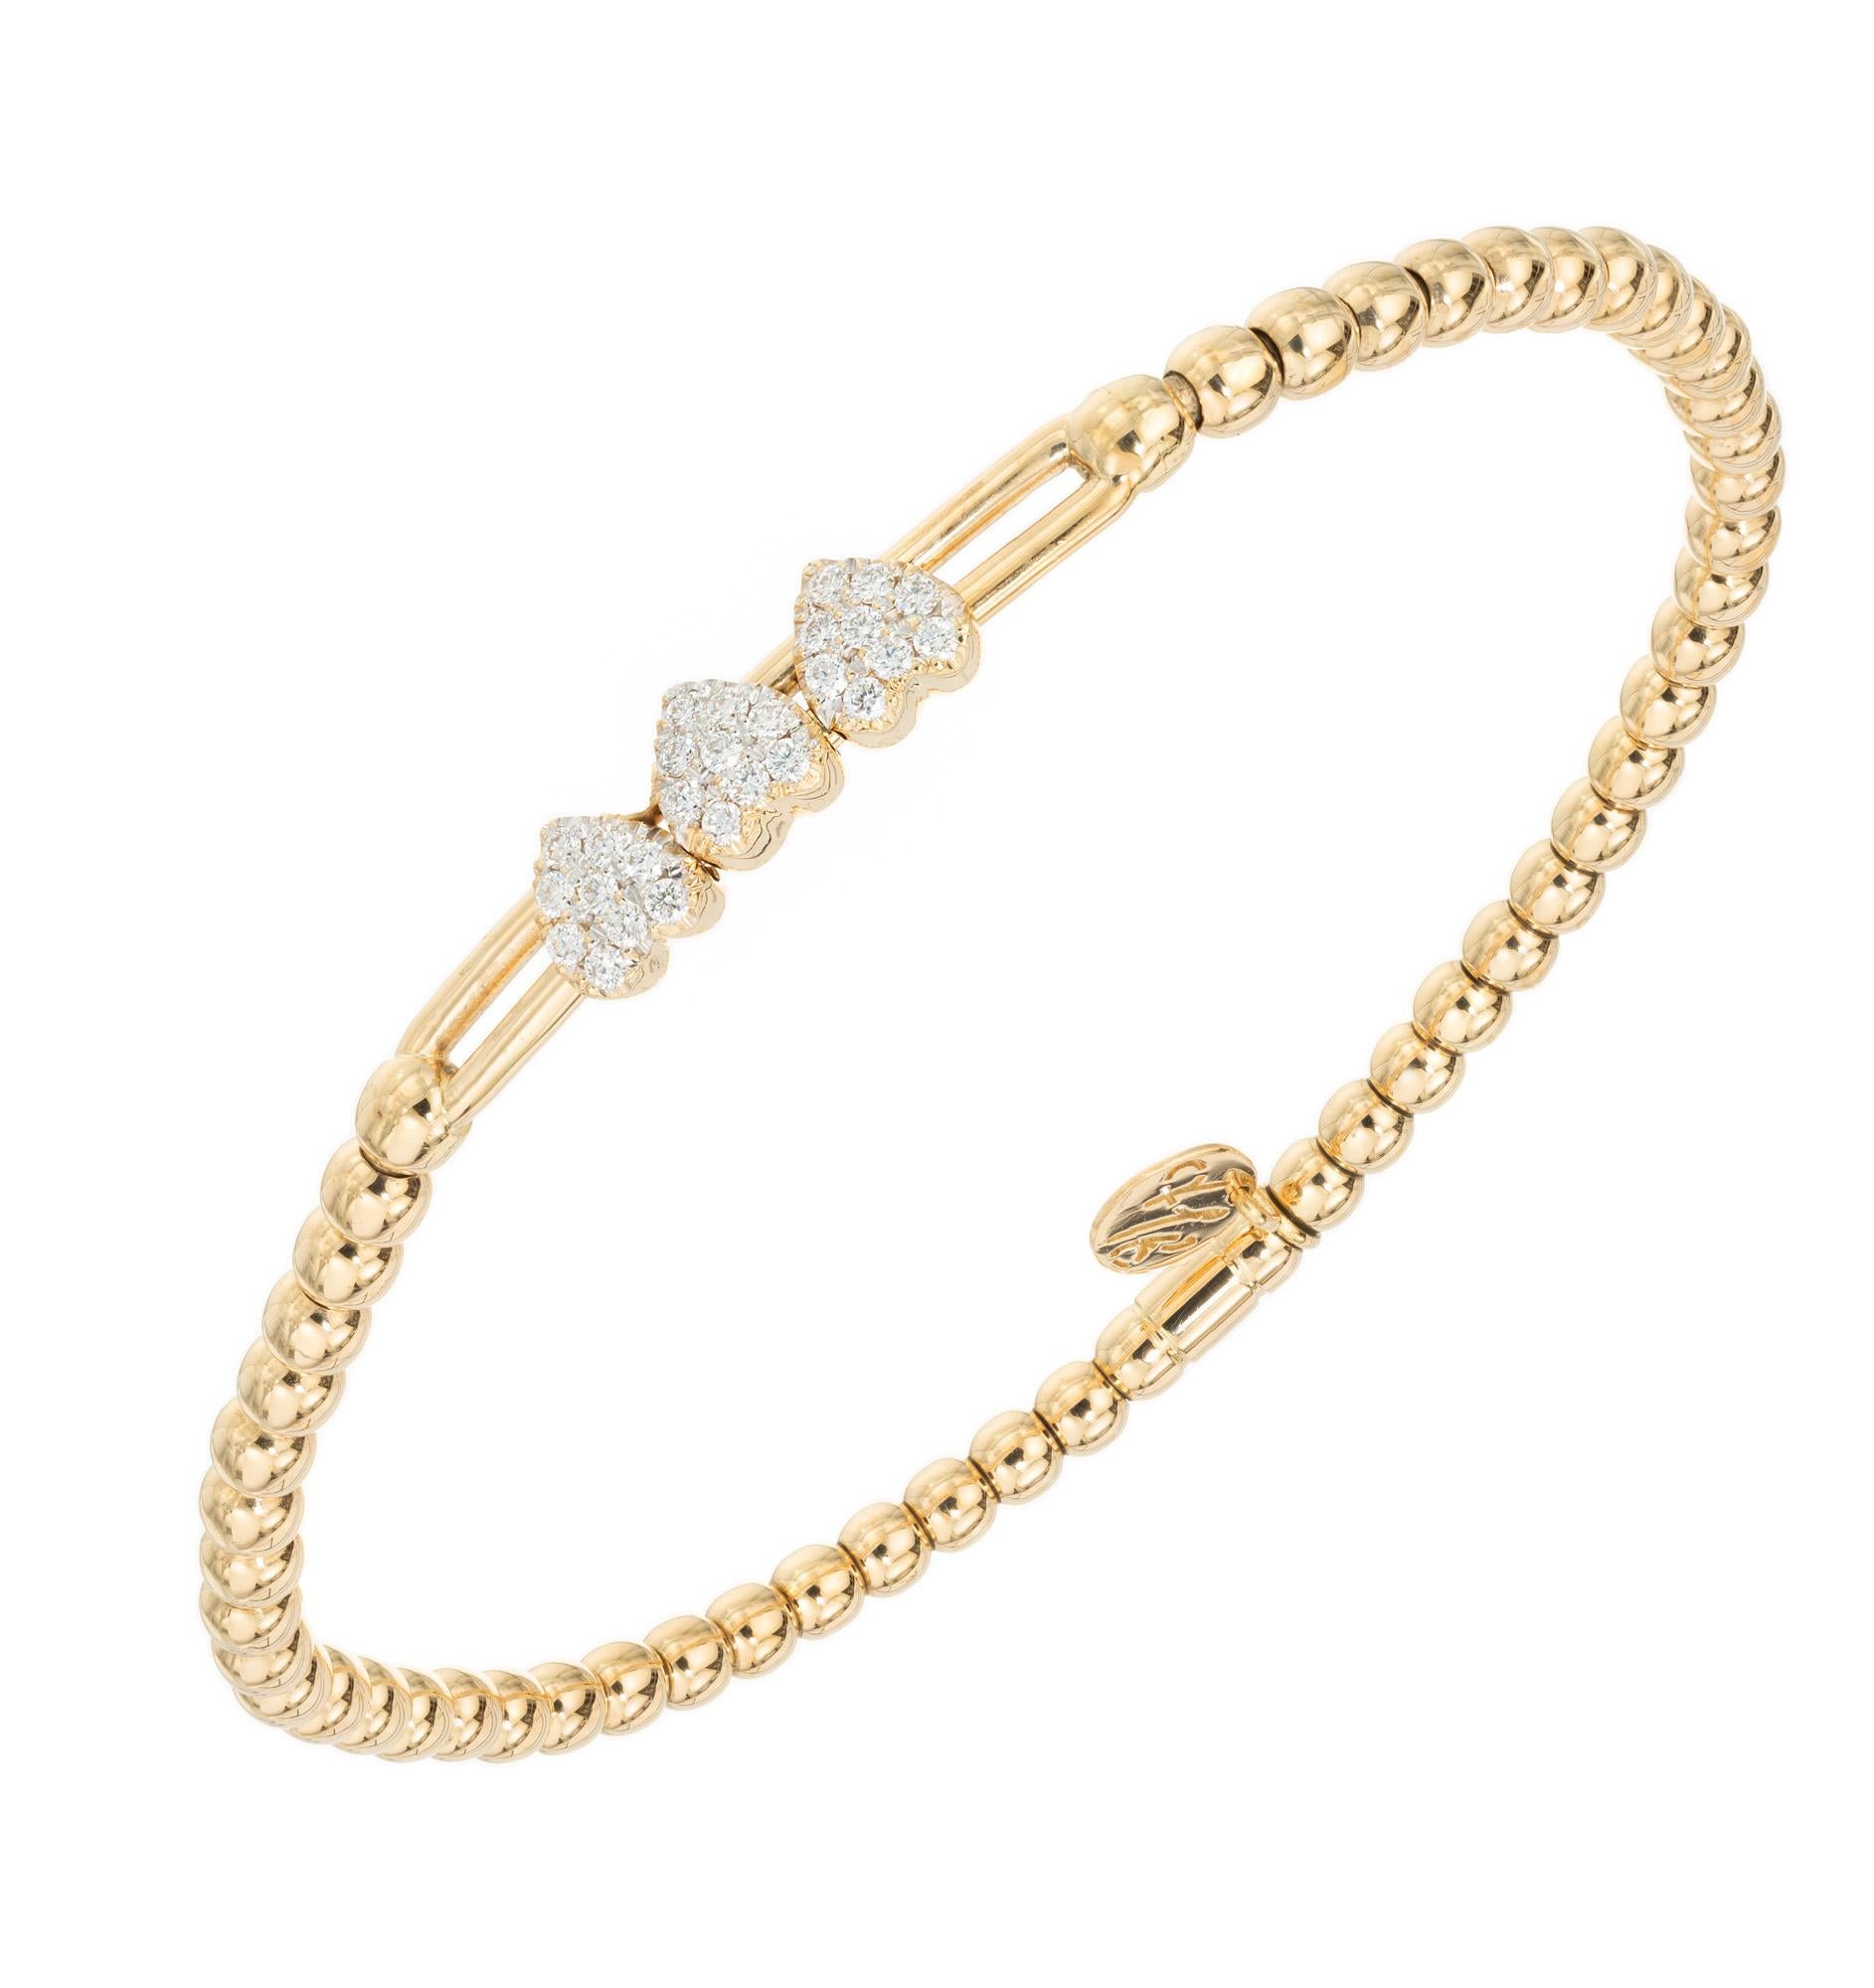 Expandable diamond bracelet. 3 bezel set diamond cluster hearts. 18k gold yellow gold stretch bead bracelet with three bezel set diamond pave hearts, each containing 9 round brilliant cut diamonds, mounted on a center section that slides. Expands to